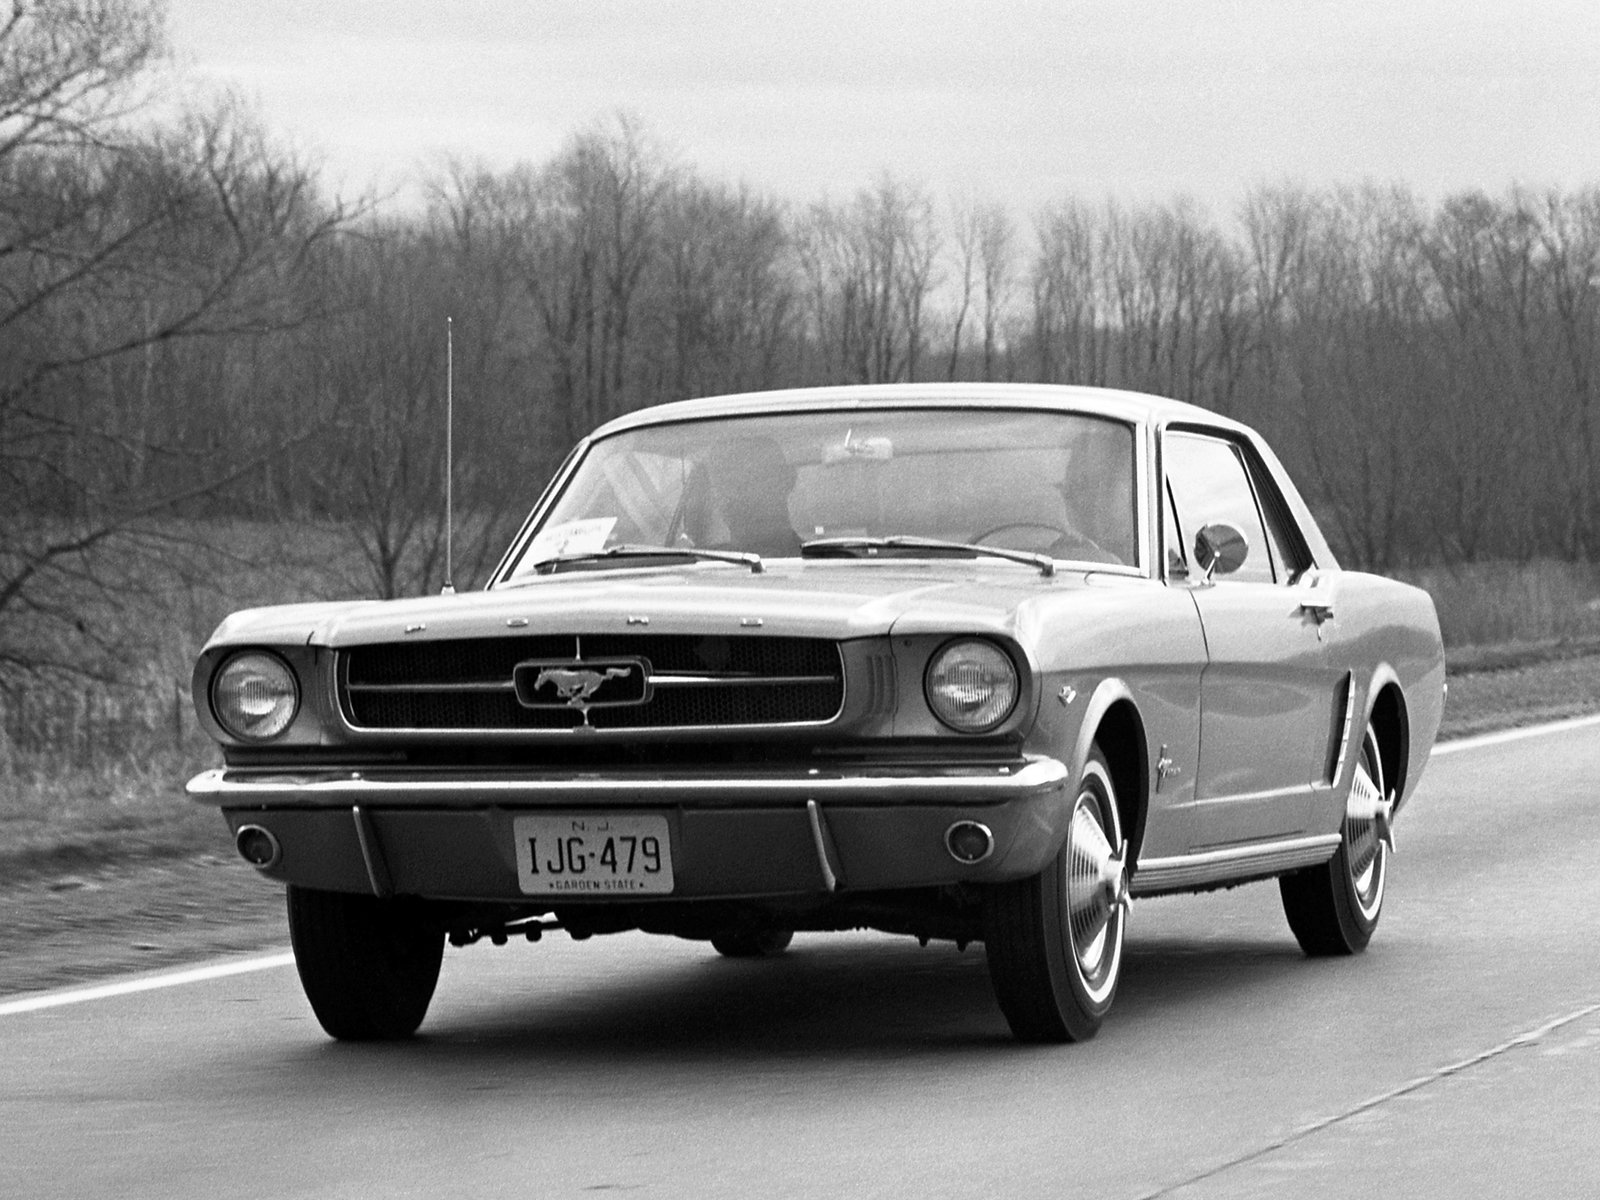 1964 Ford Mustang Coupe Wallpapers Hd Desktop And Mobile Backgrounds